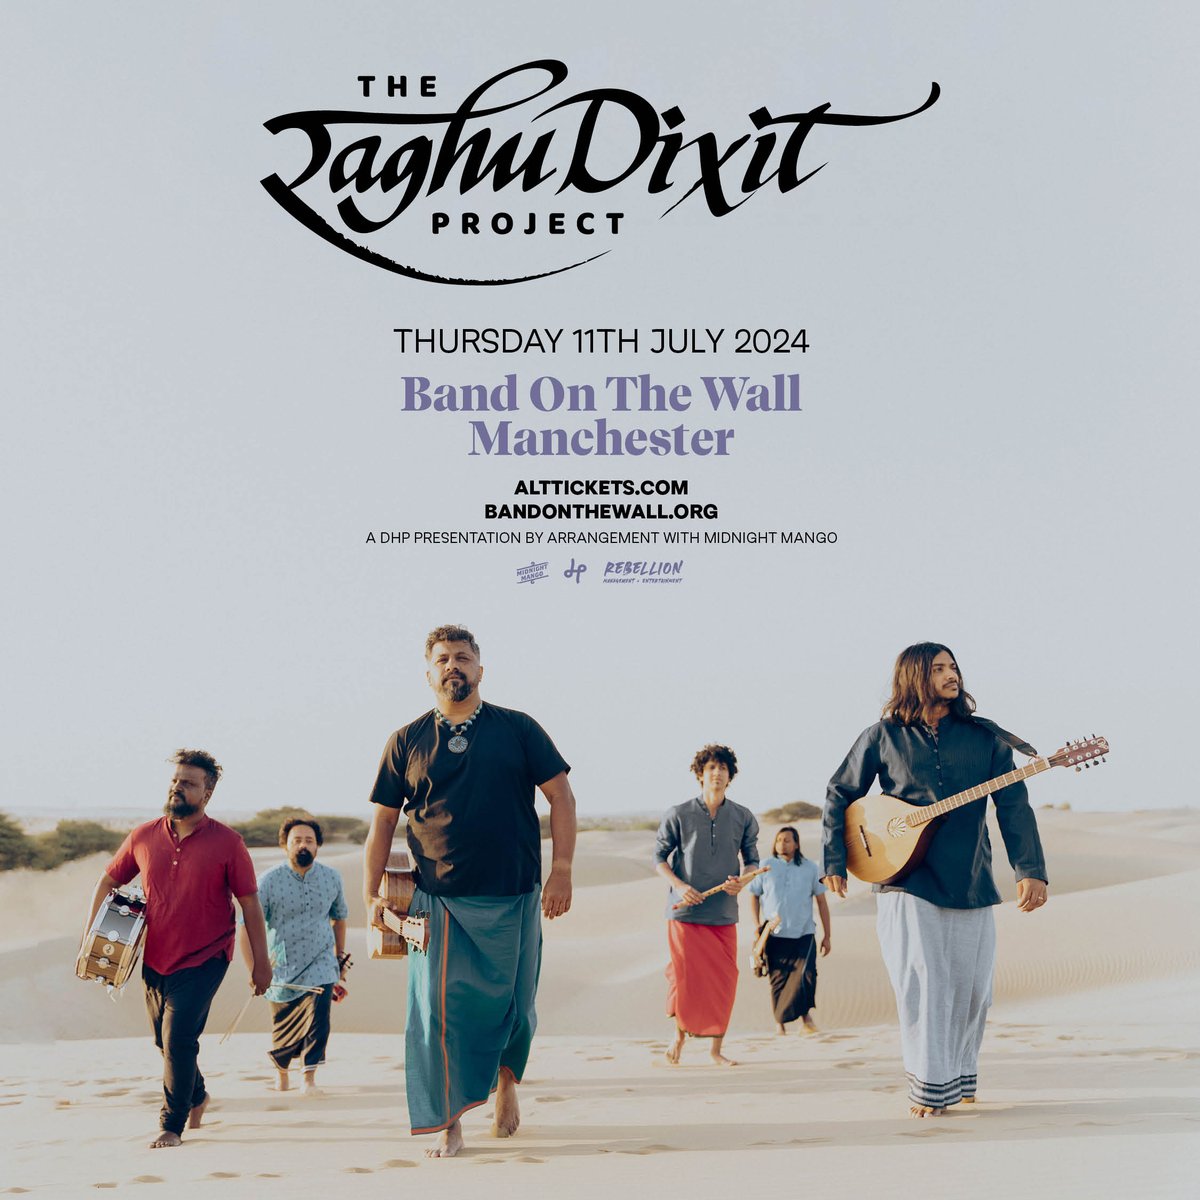 Indian folk-rock band The @Raghu_Dixit Project will perform at Manchester’s Band On The Wall later this summer on 11th July, with tickets on sale now: tinyurl.com/mry82ewc